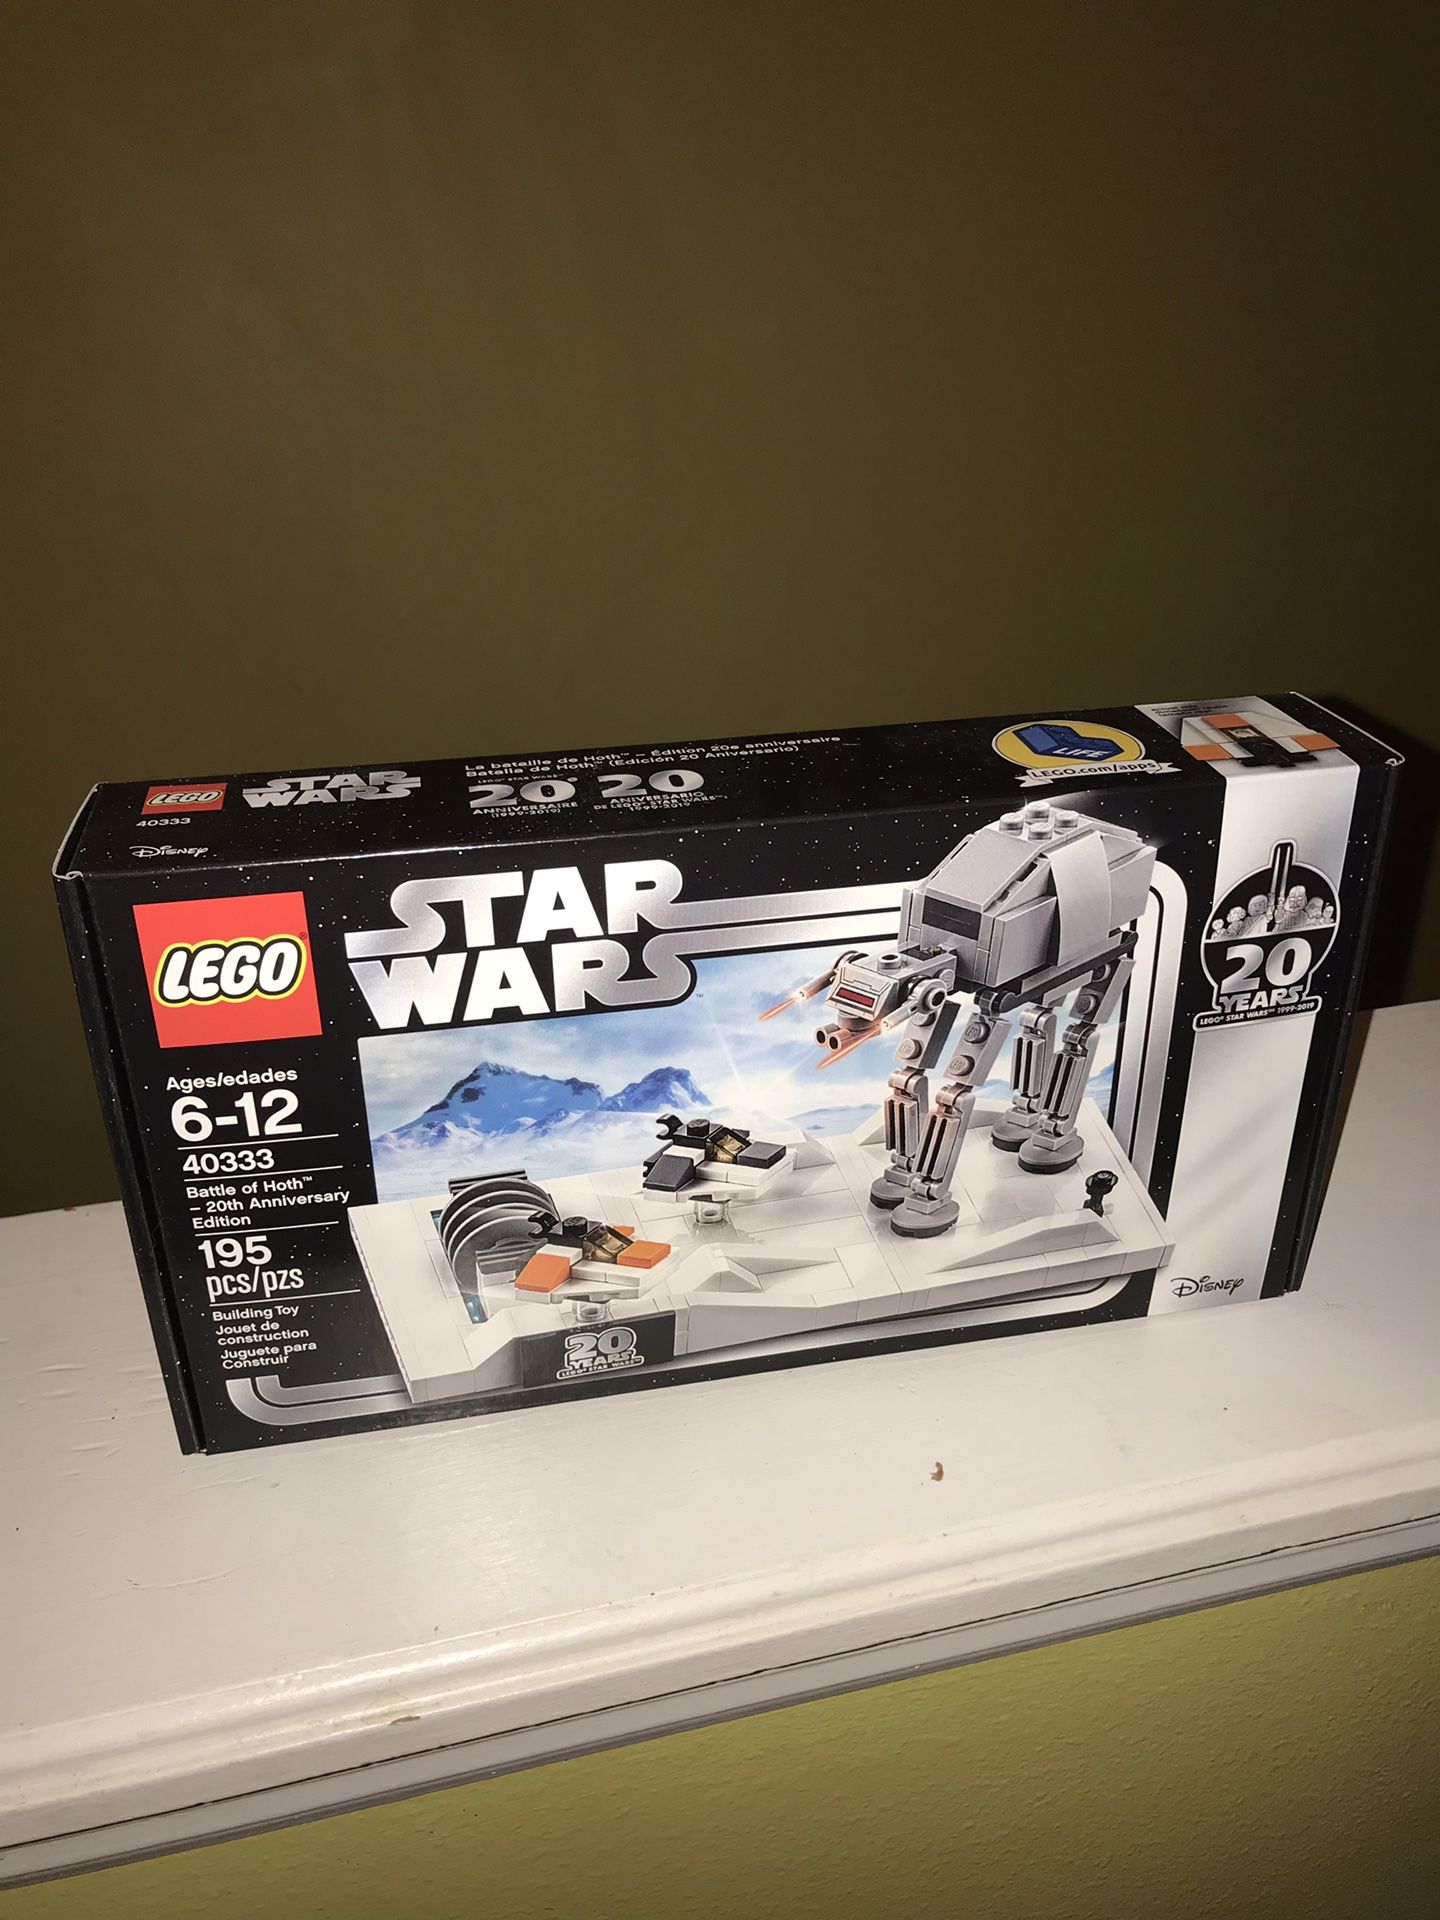 LEGO #40333 Star Wars Battle of Hoth - 20th Anniversary Edition (New/Sealed)